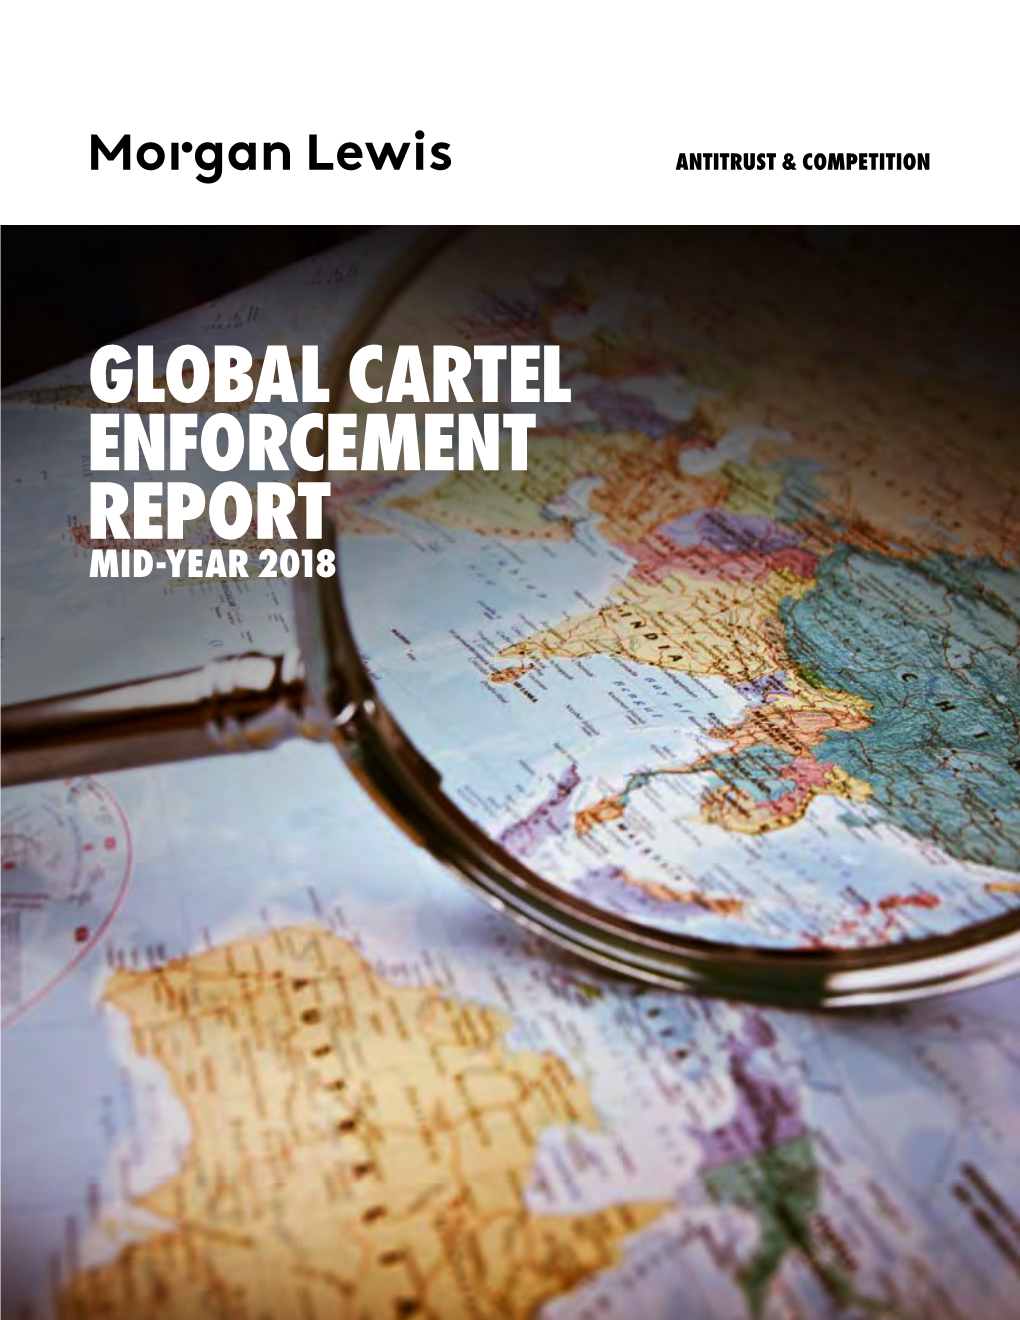 Global Cartel Enforcement Report Mid-Year 2018 Contents Contents Introduction